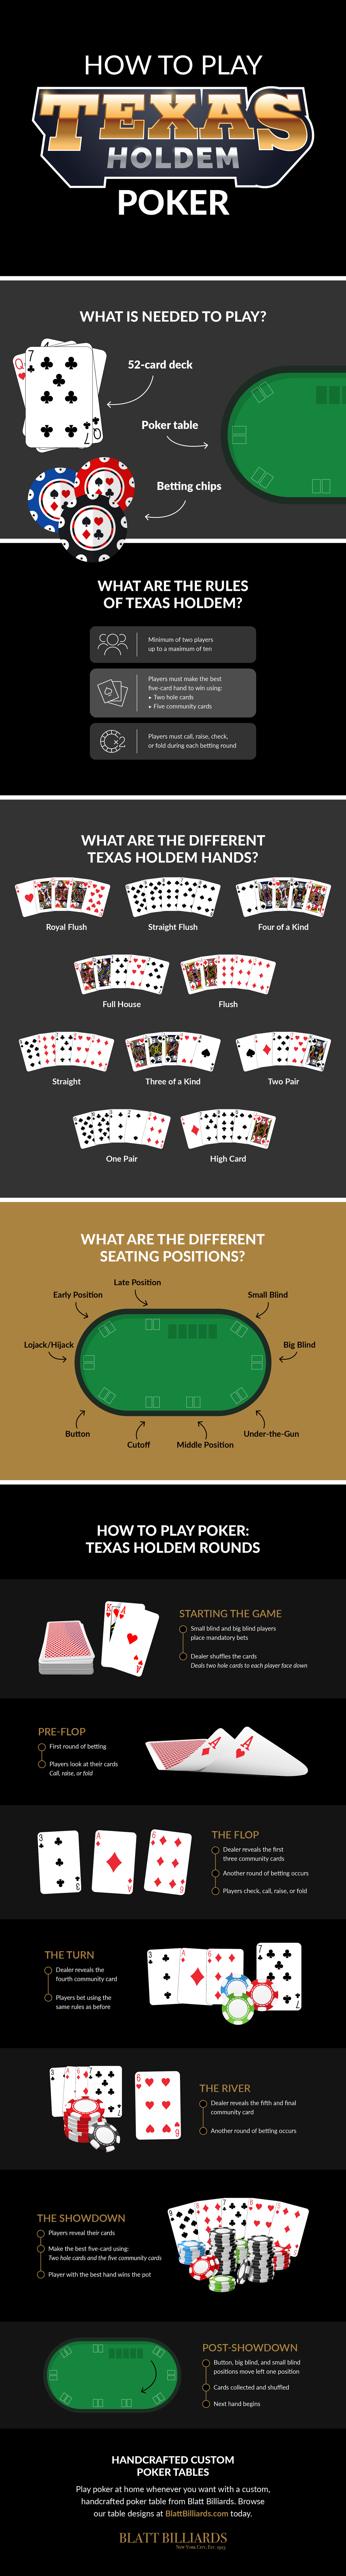 How to Play Texas Holdem Poker Infographic